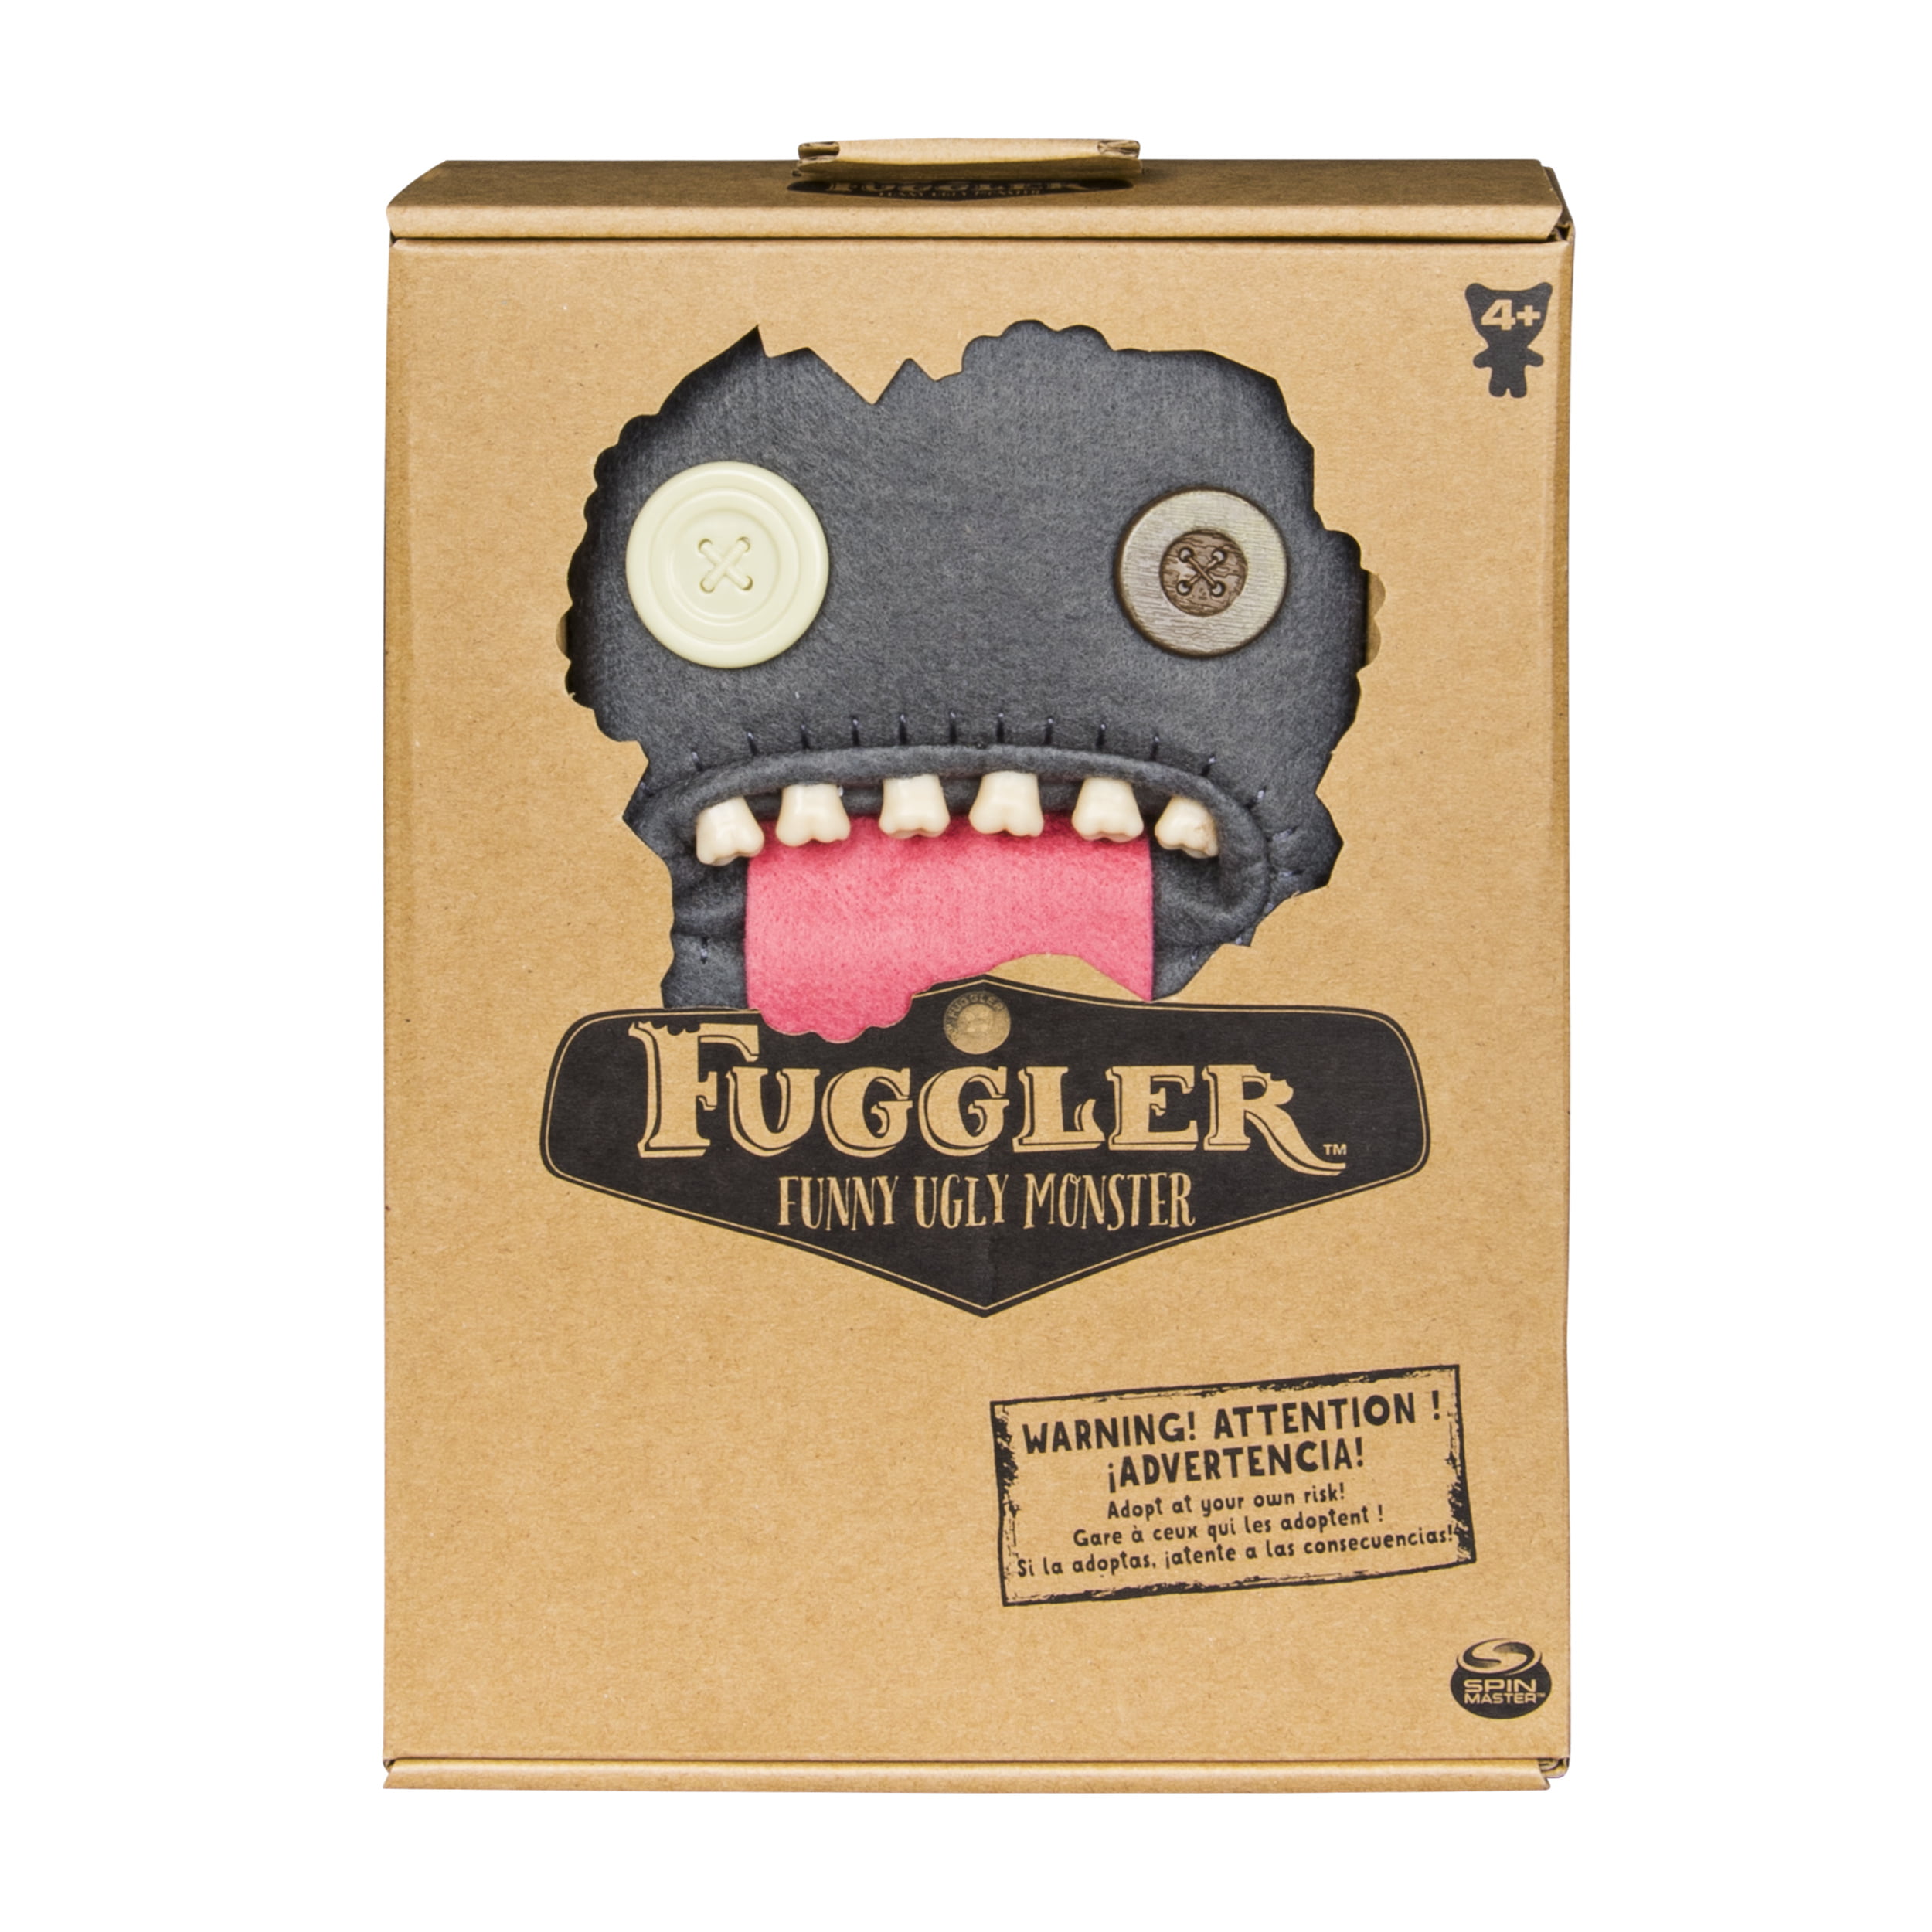 Fuggler Oogah Boogah New Collectable Soft Toy Grey Felt 9 Inch 